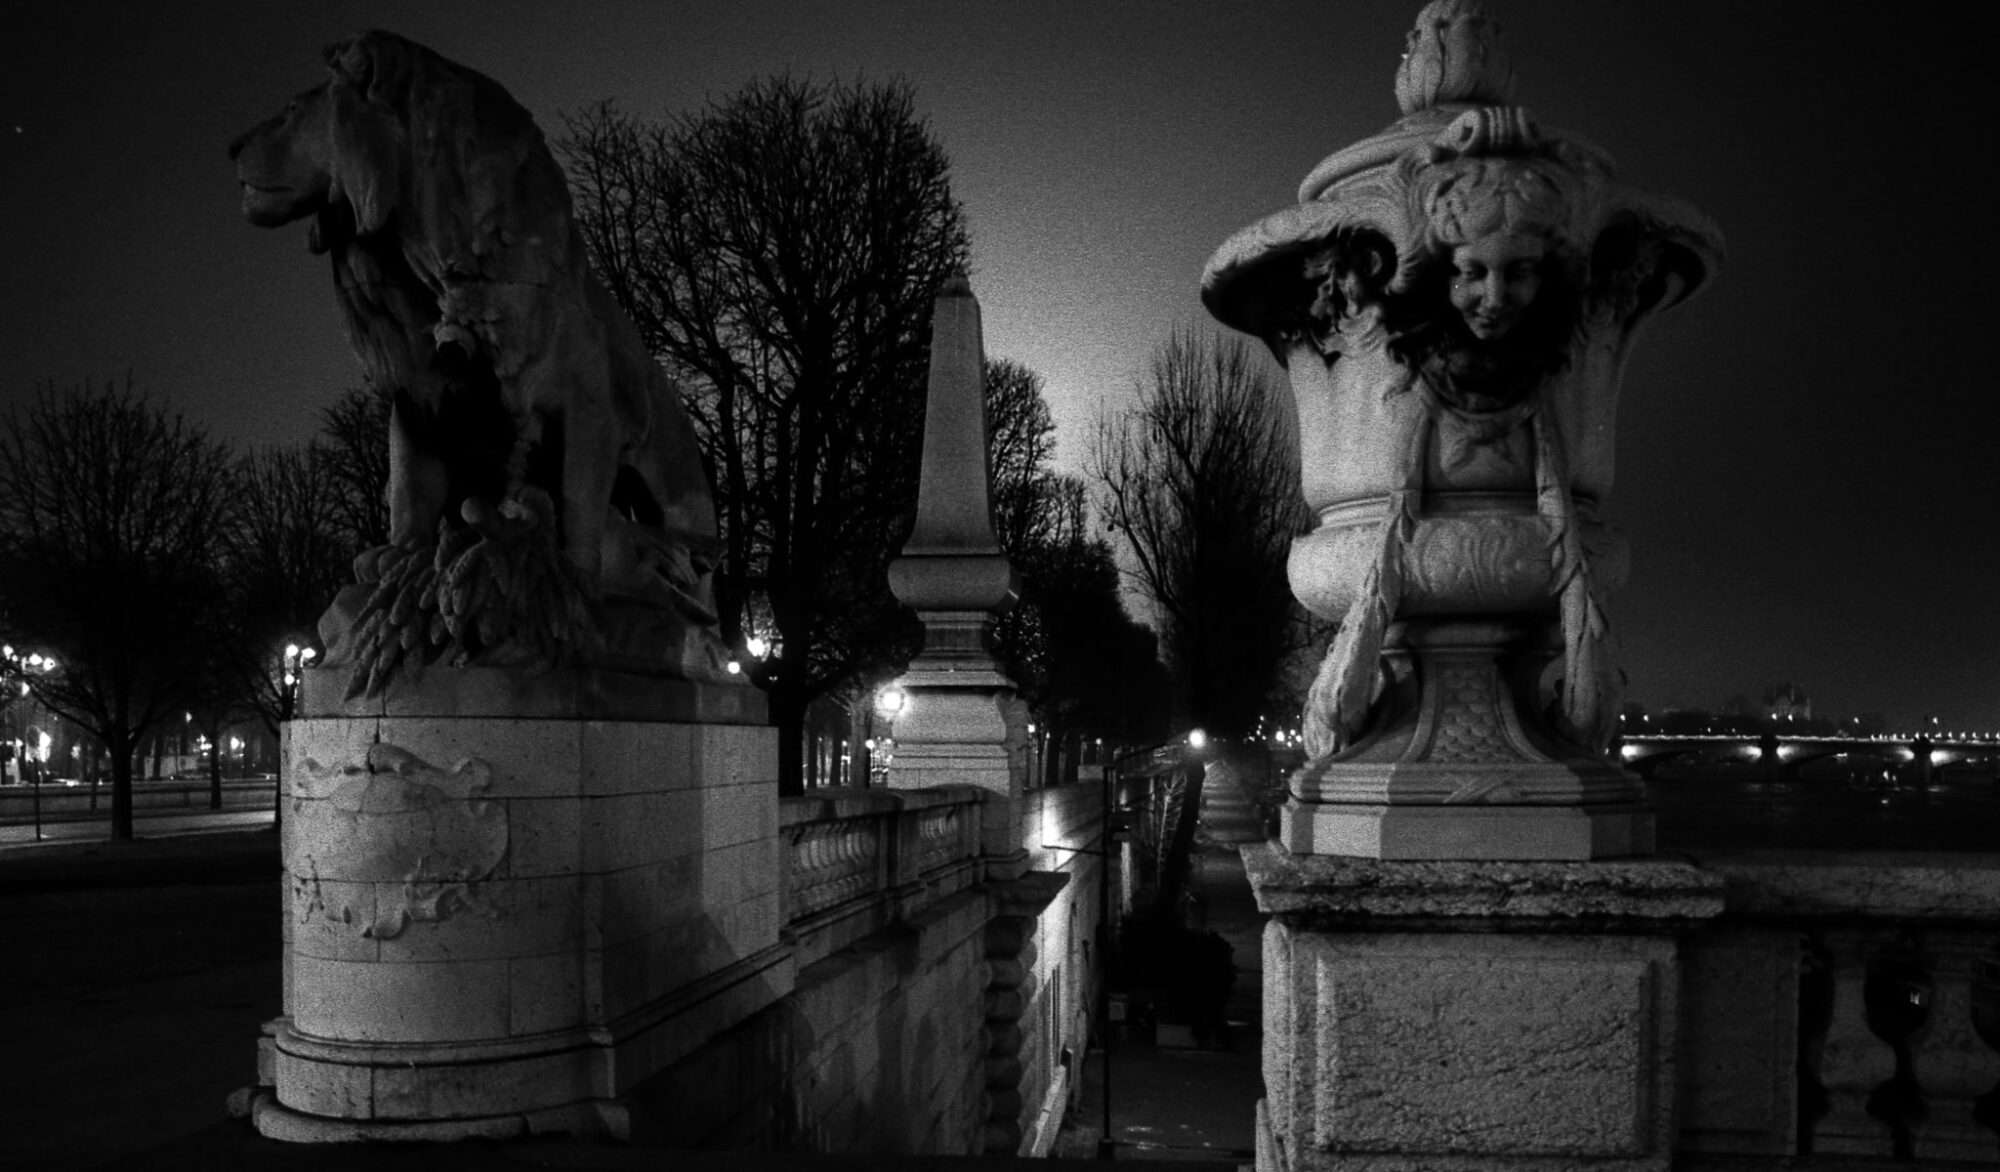 Pont Alexandre at night with an eerie, misty atmosphere photographed in black and white.